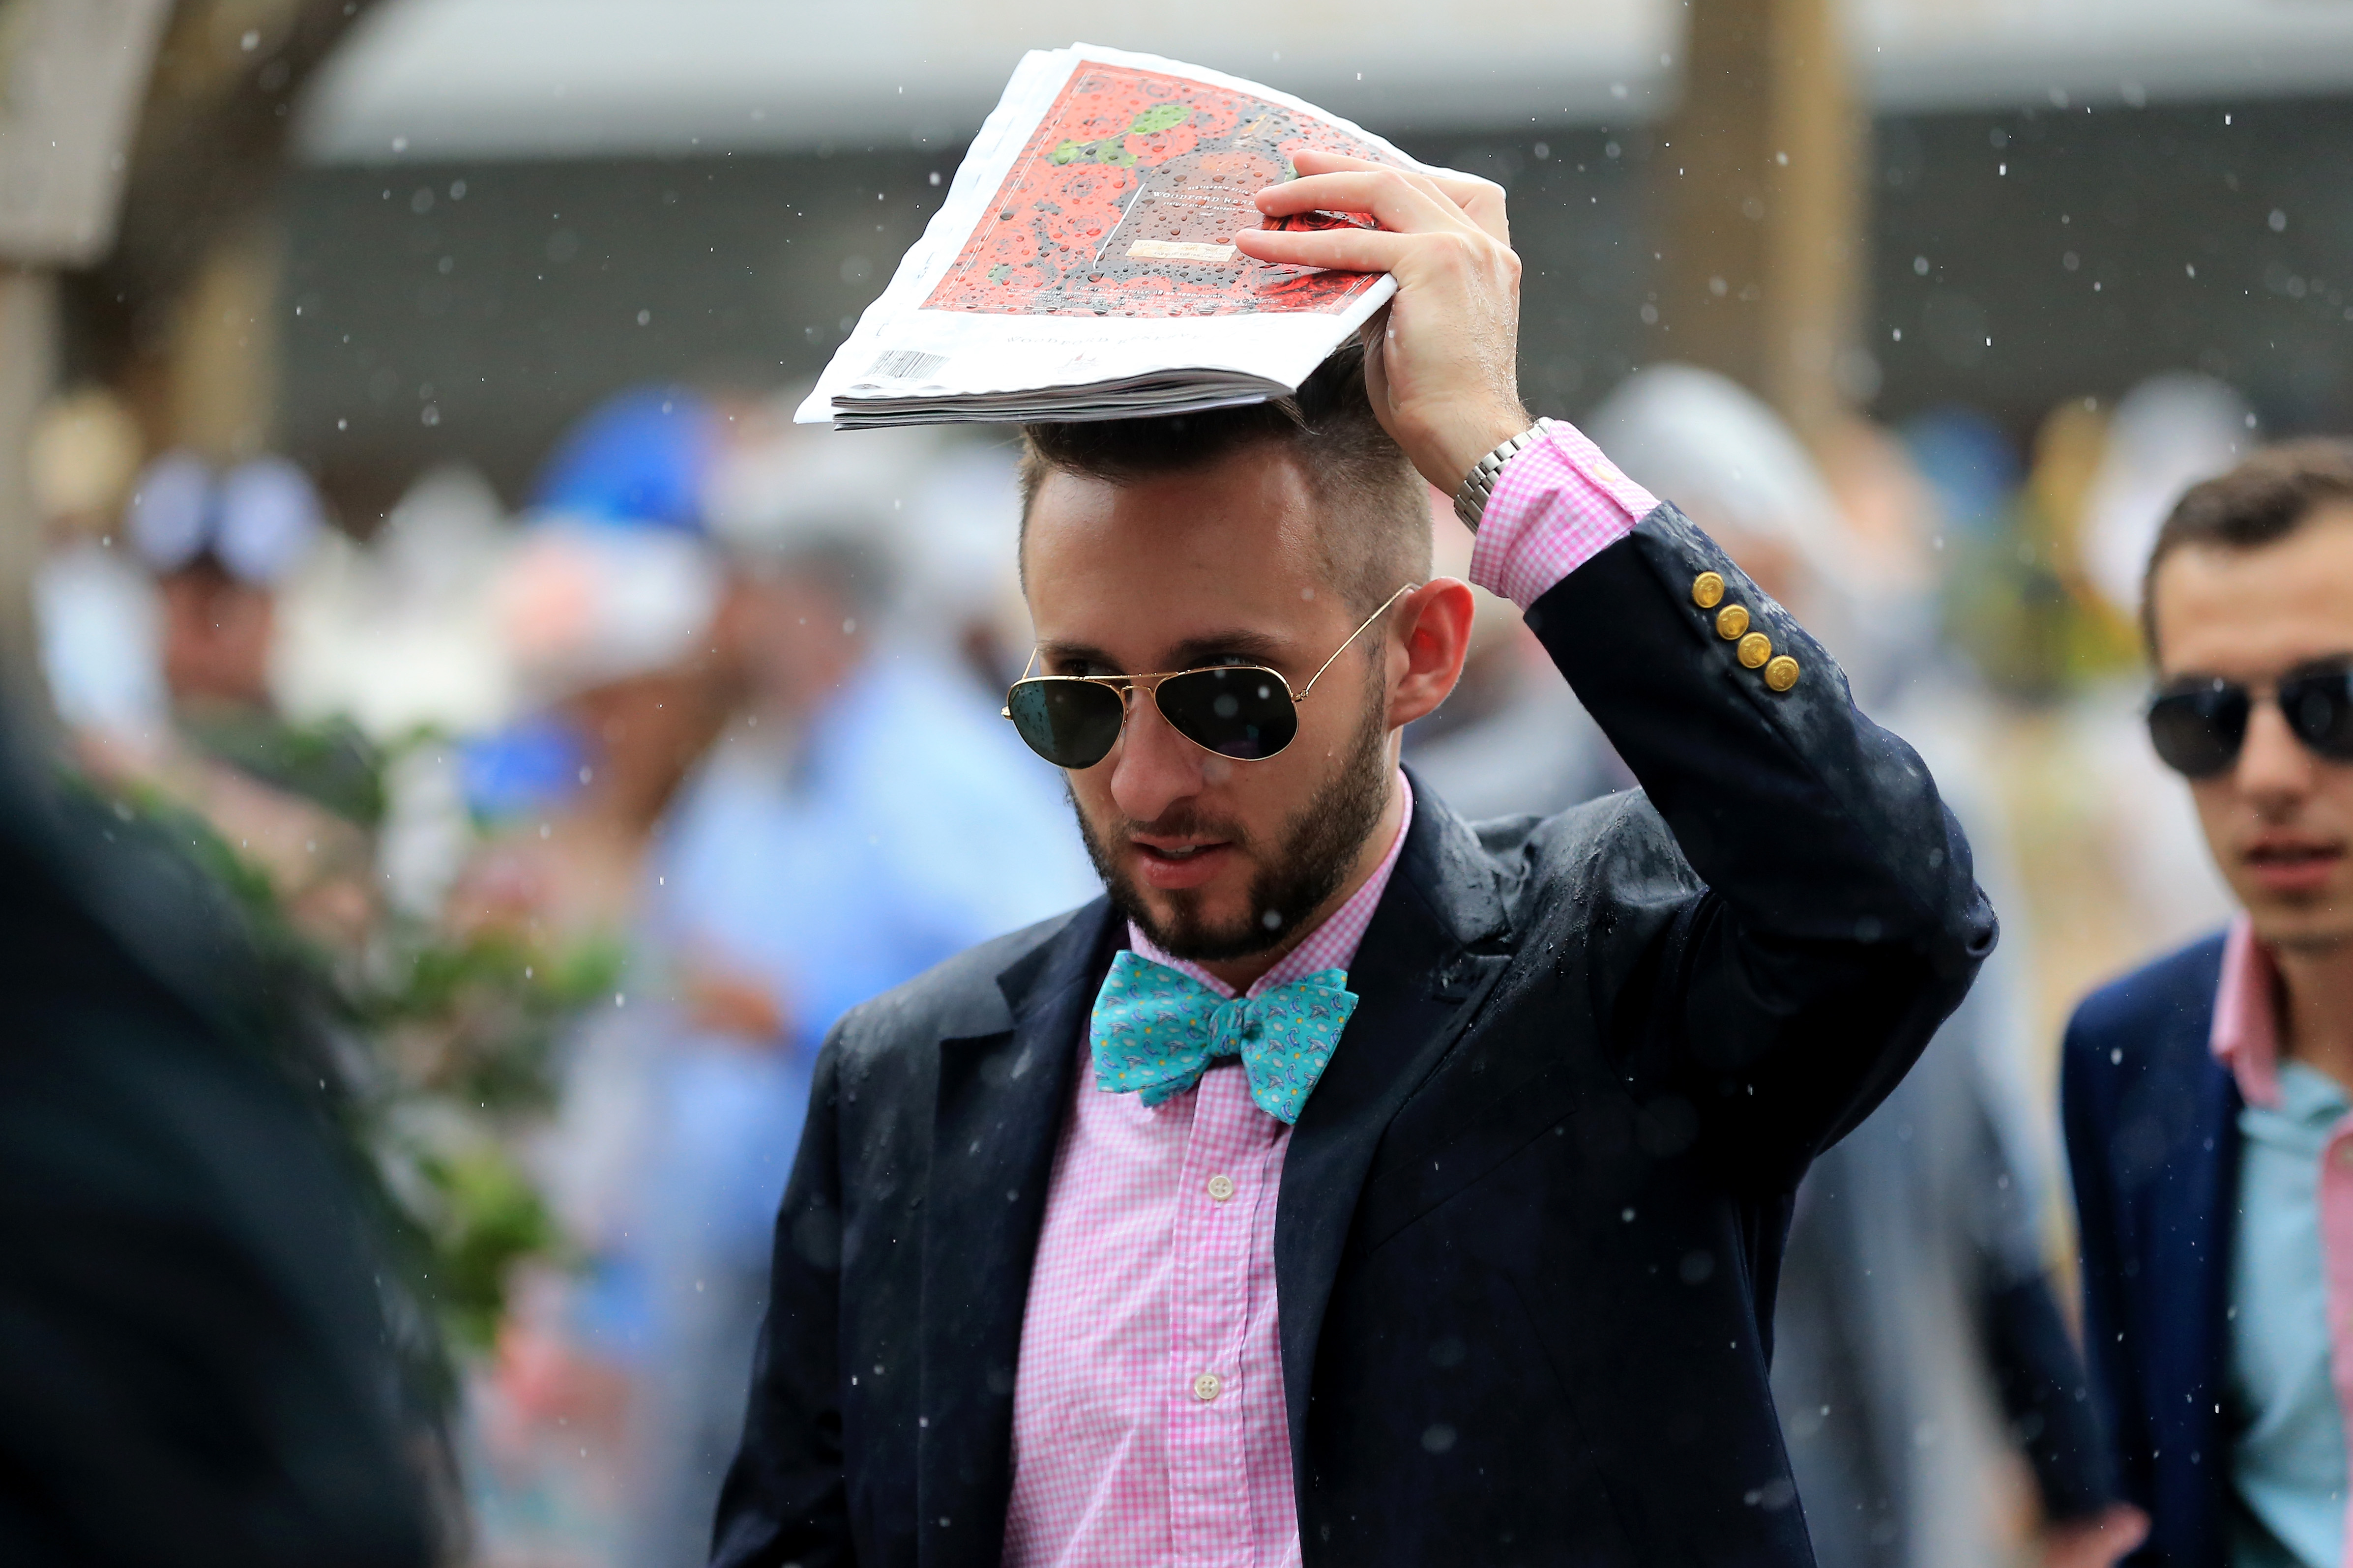 A fan looks for shelter as it rains prior to the 144th running of the Kentucky Derby at Churchill Downs on May 5, 2018 in Louisville, Kentucky (Sean M. Haffey—Getty Images)